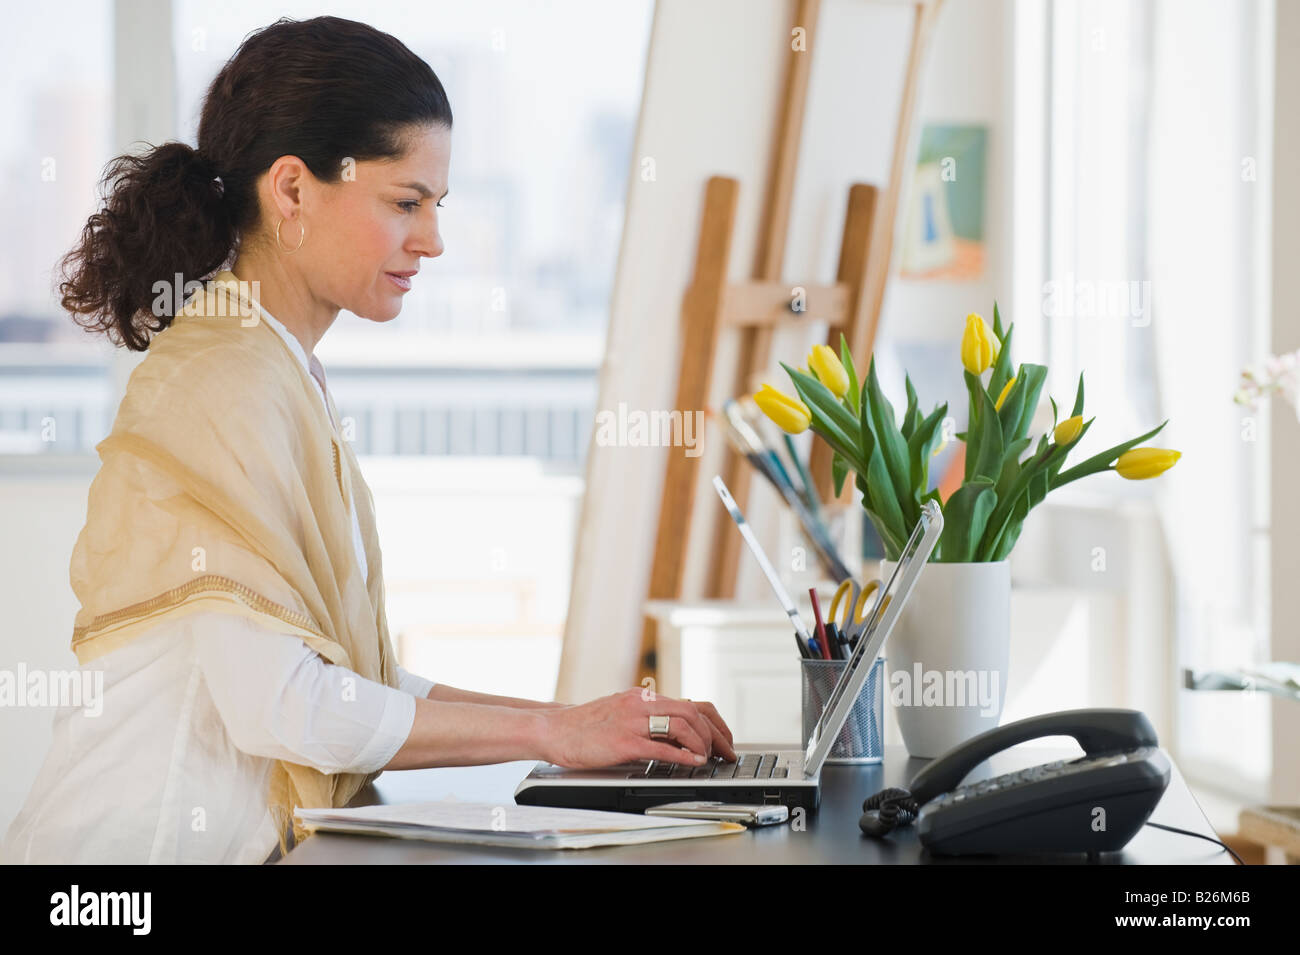 Hispanic woman typing on laptop Banque D'Images